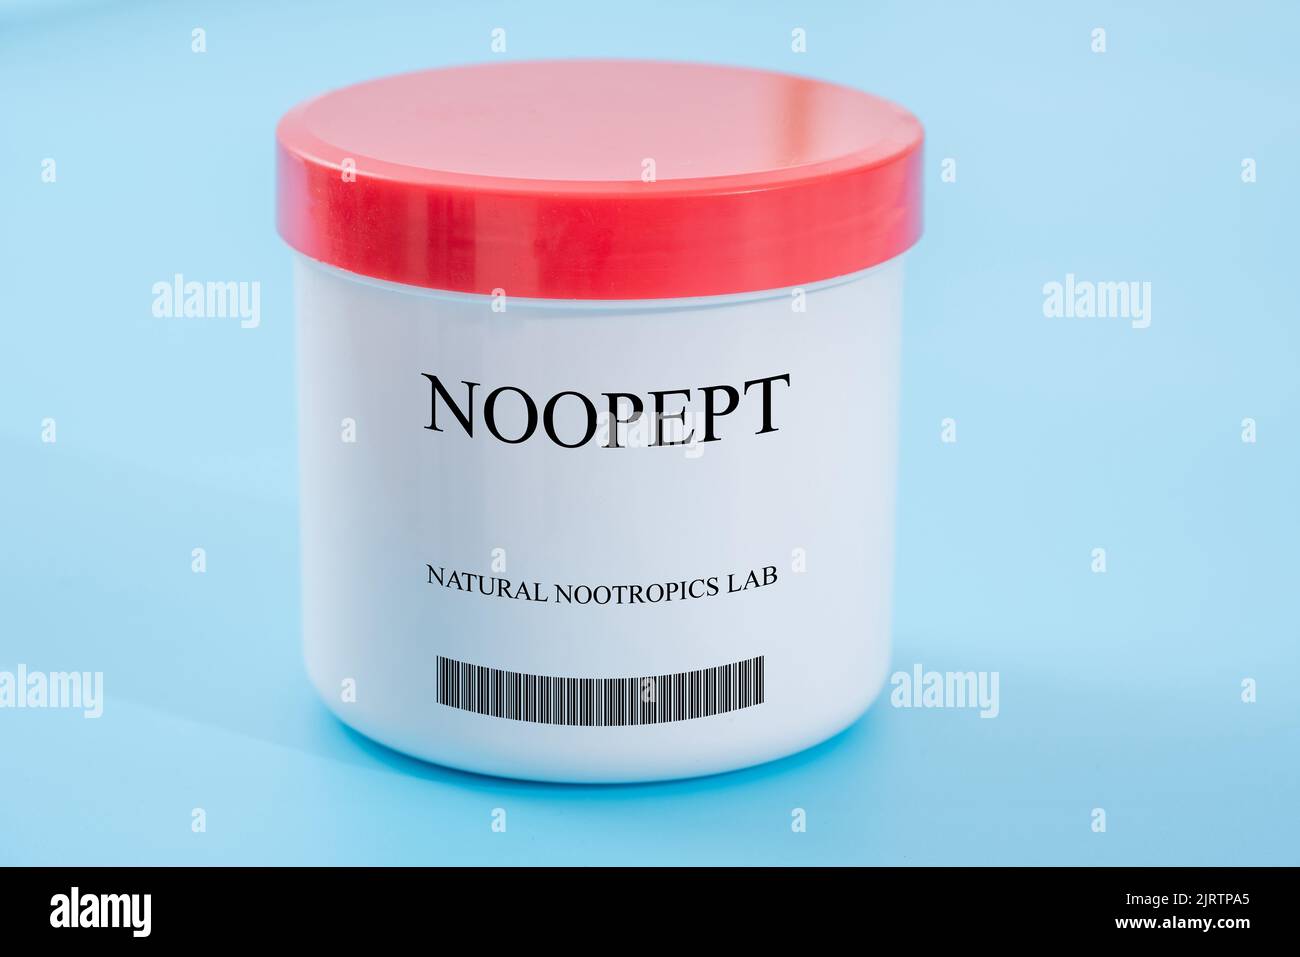 noopept-it-is-a-nootropic-drug-that-stimulates-the-functioning-of-the-brain-brain-booster-2JRTPA5.jpg